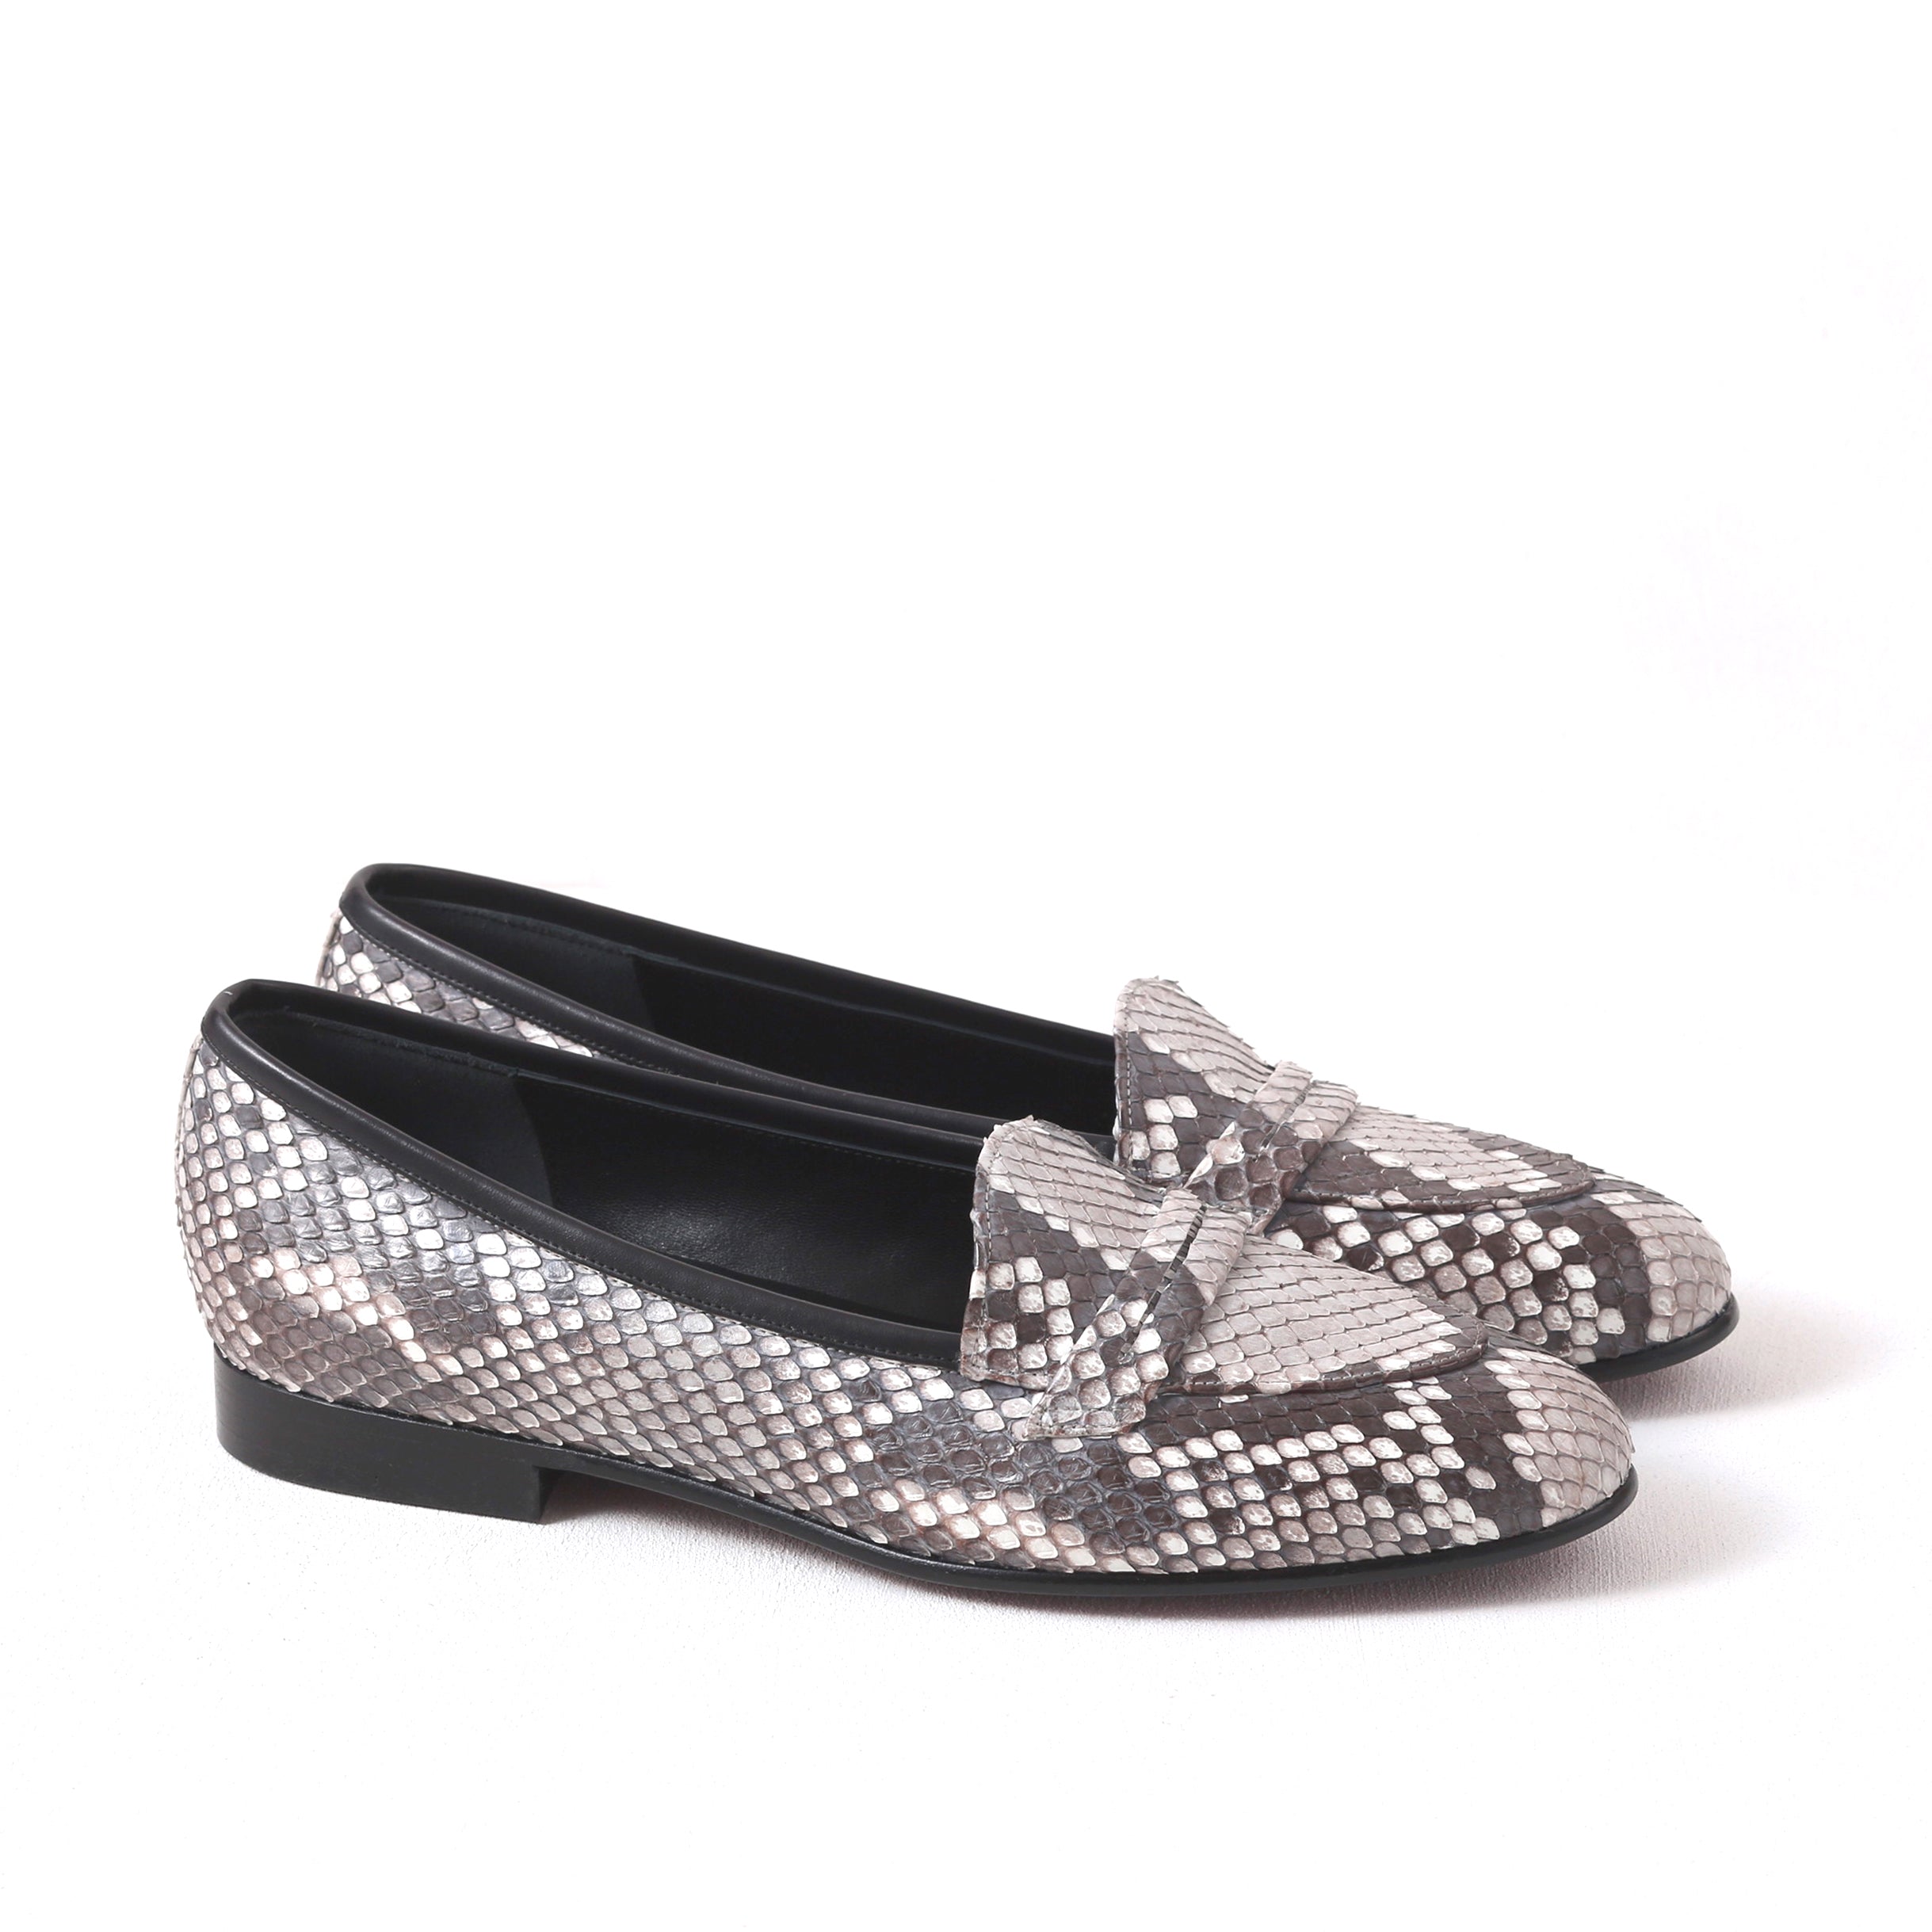 [women's] penny loafers - white python